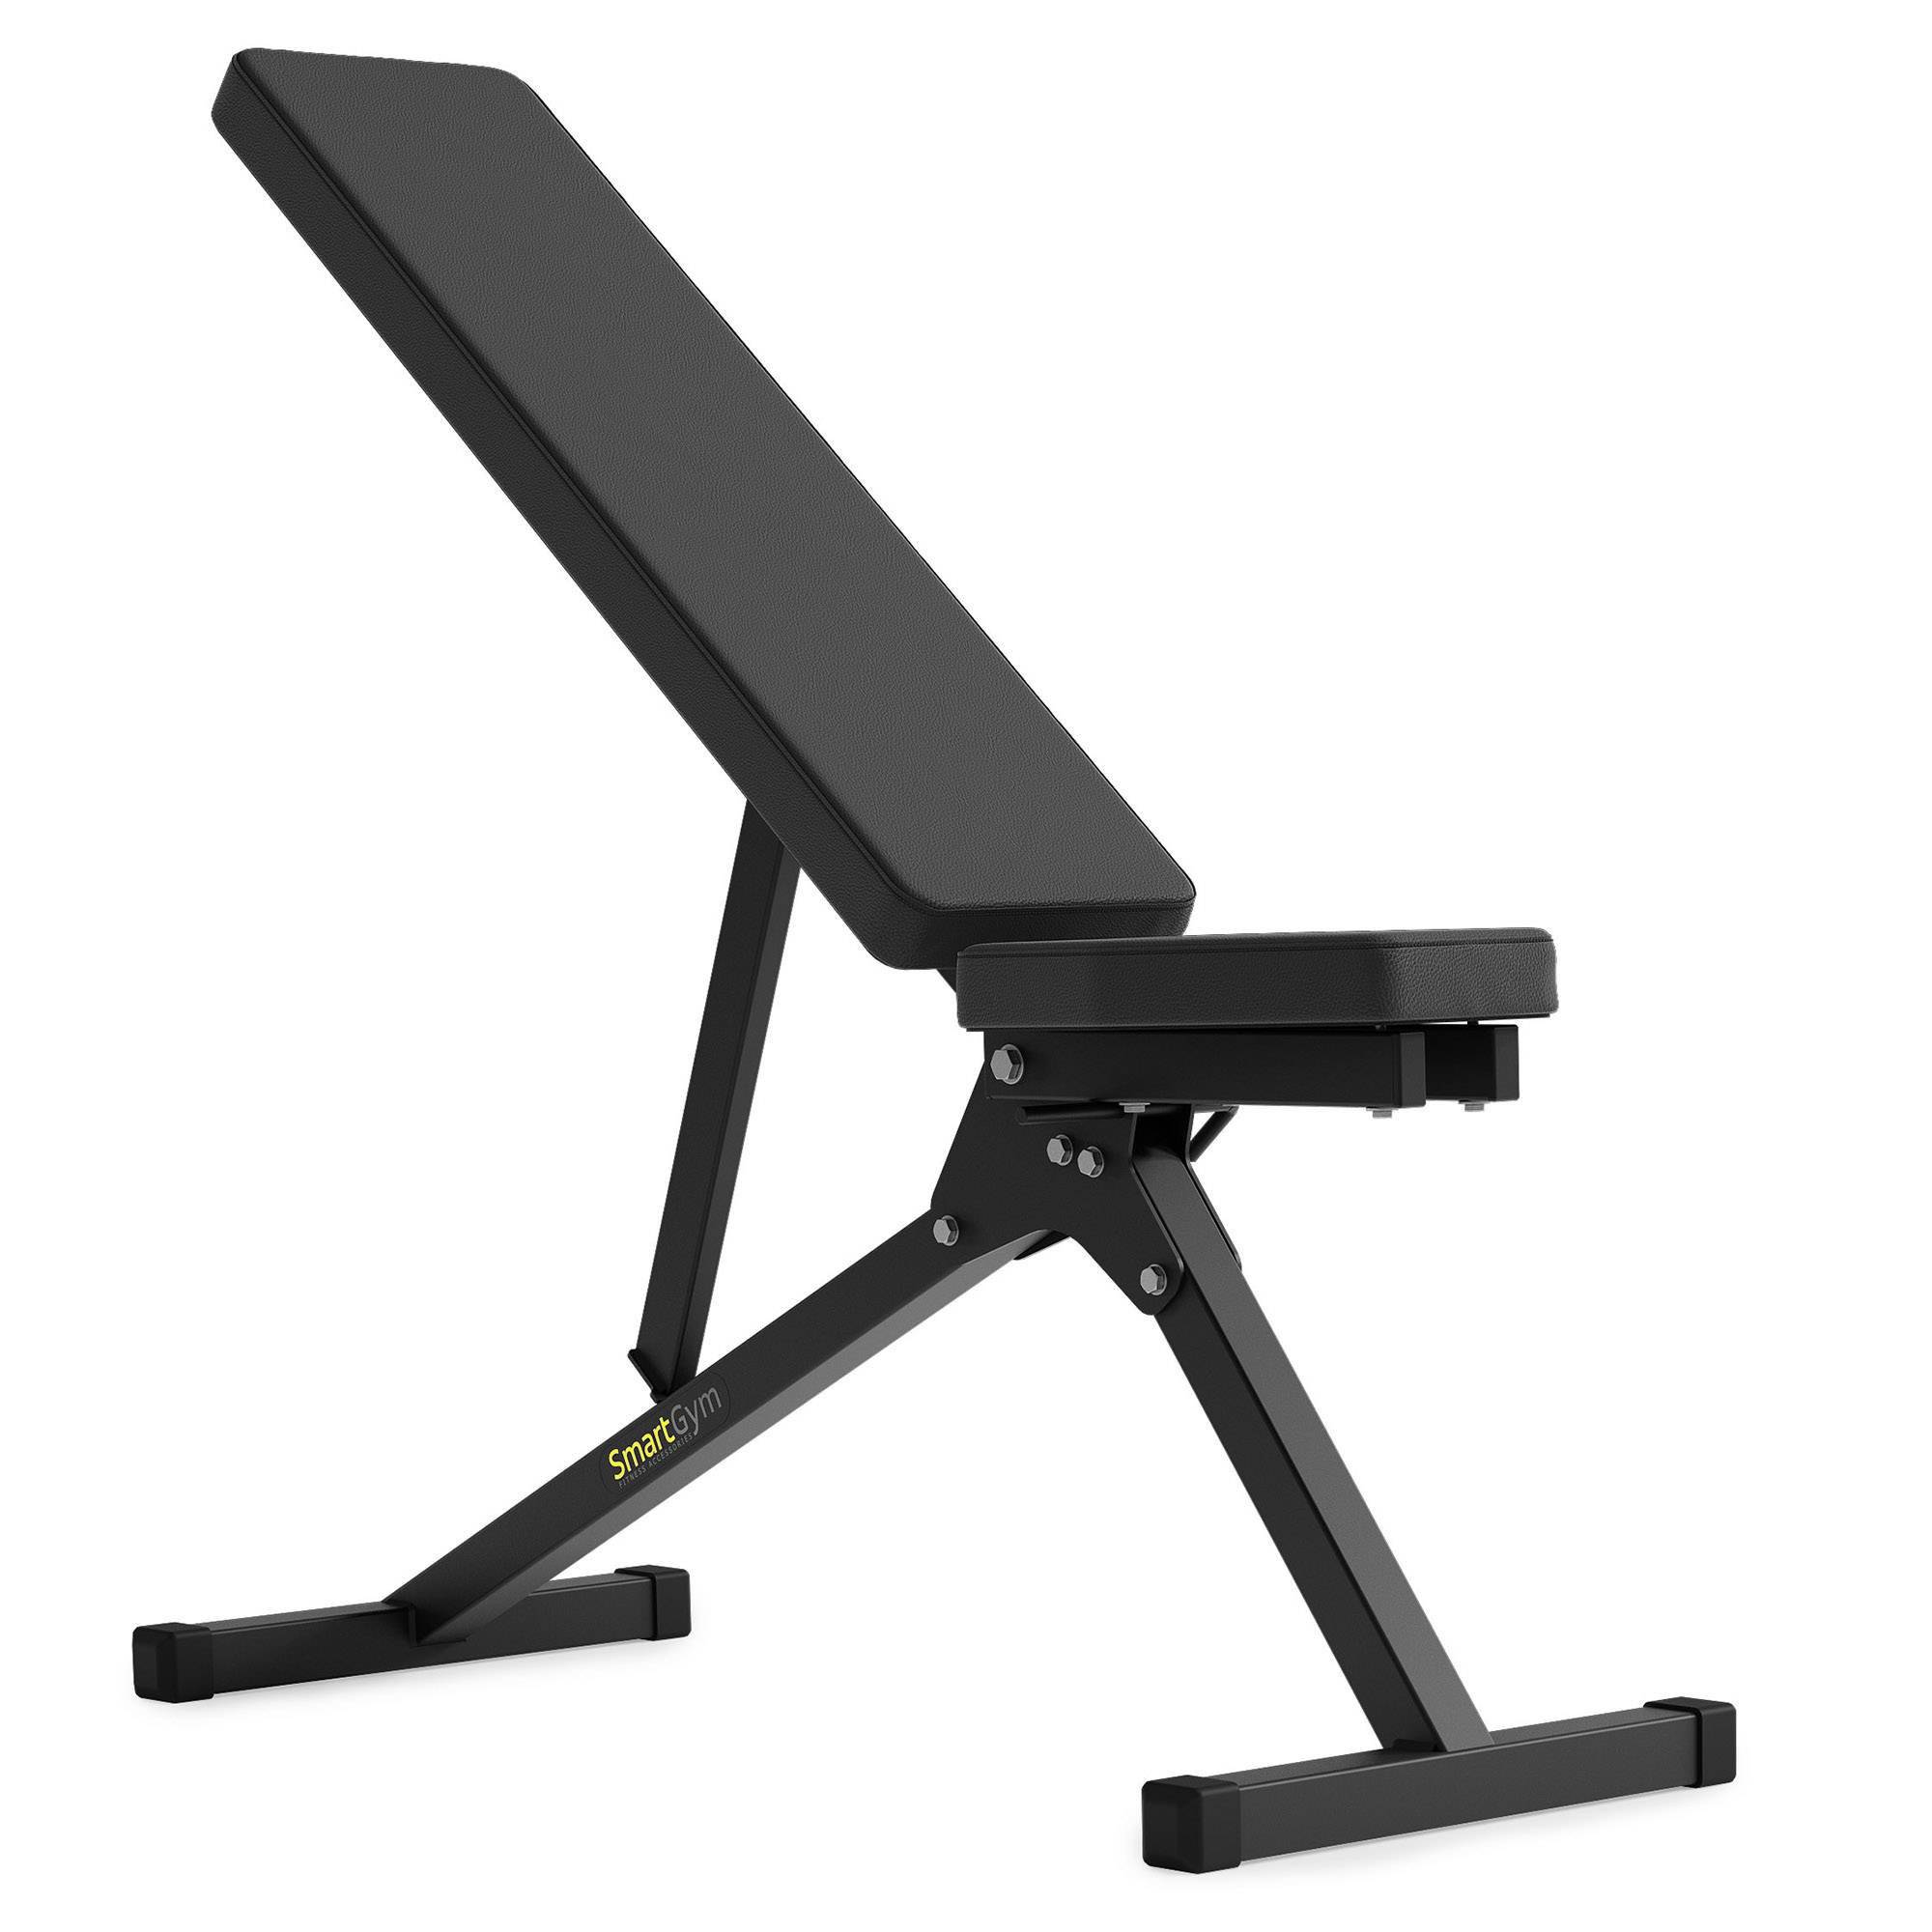 Adjustable bench SG-11 - SmartGym Fitness Accessories | Strength equipment  \\ Training benches \\ Benches